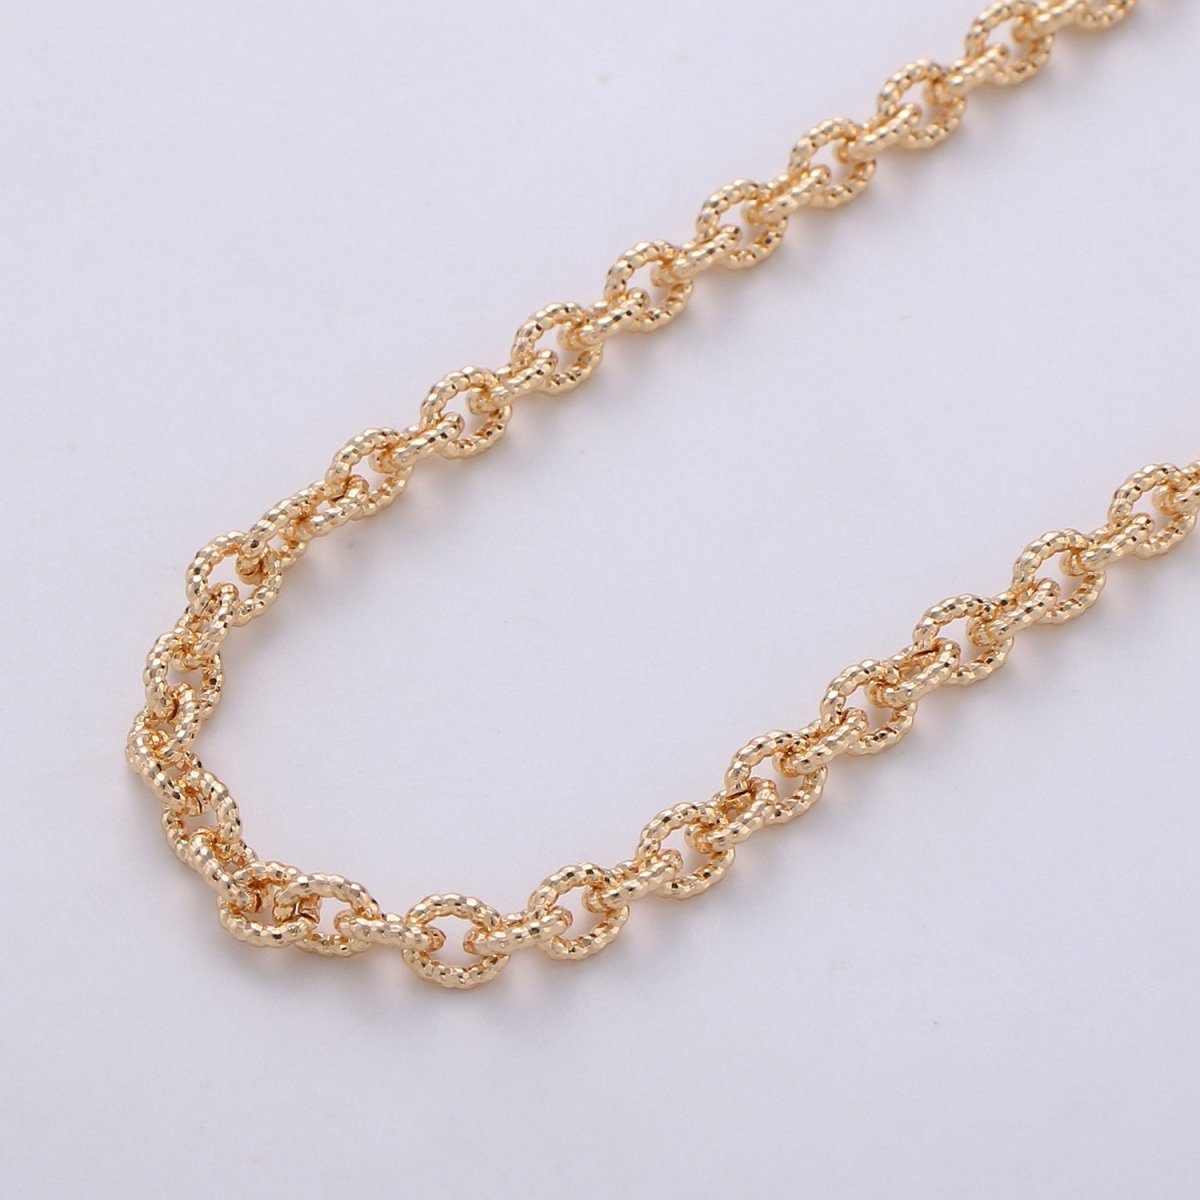 16K Gold Filled Chain, Textured Cable Unique Rolo Chain, 6mm Unfinished Chain by Yard | ROLL-268 Clearance Pricing - DLUXCA